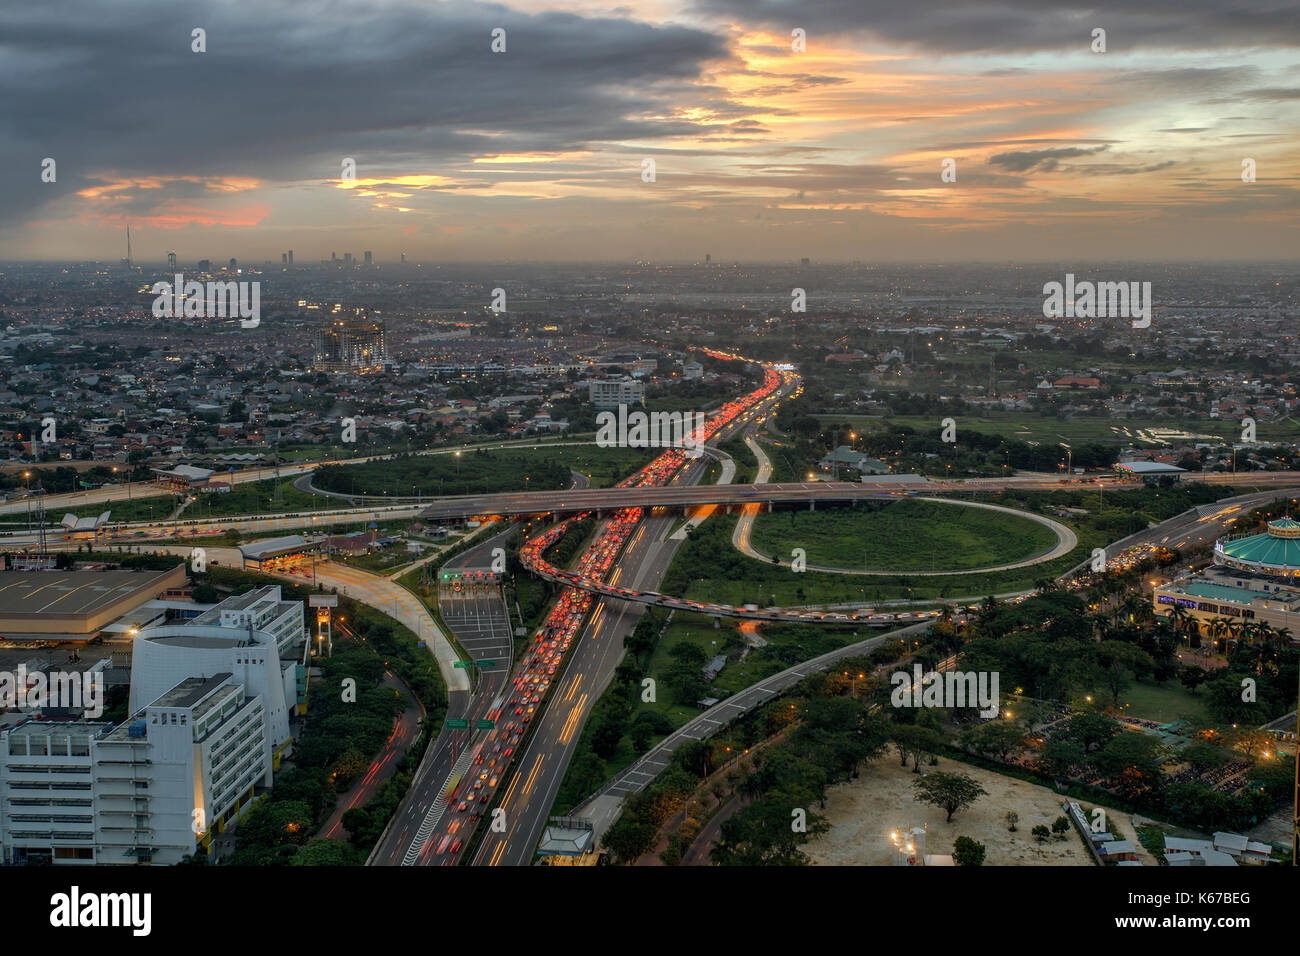 Aerial view of city, Jakarta, Indonesia Stock Photo